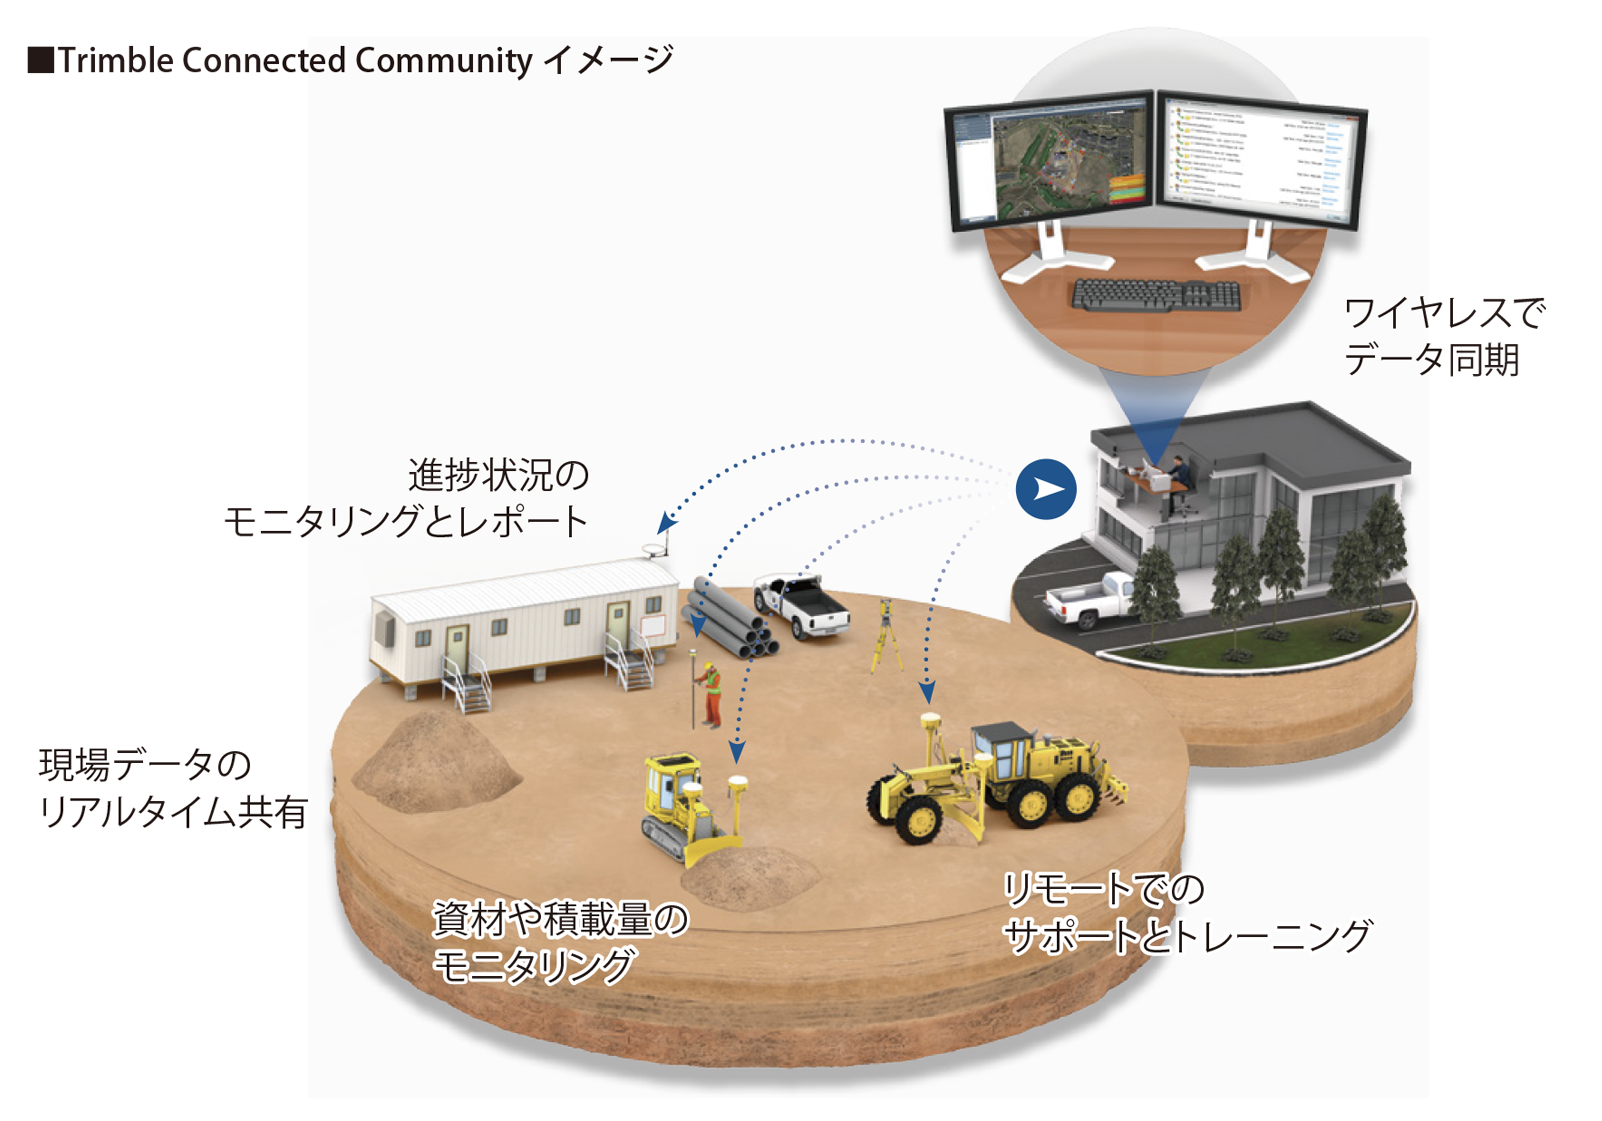 Connected Community　建設情報共有システム